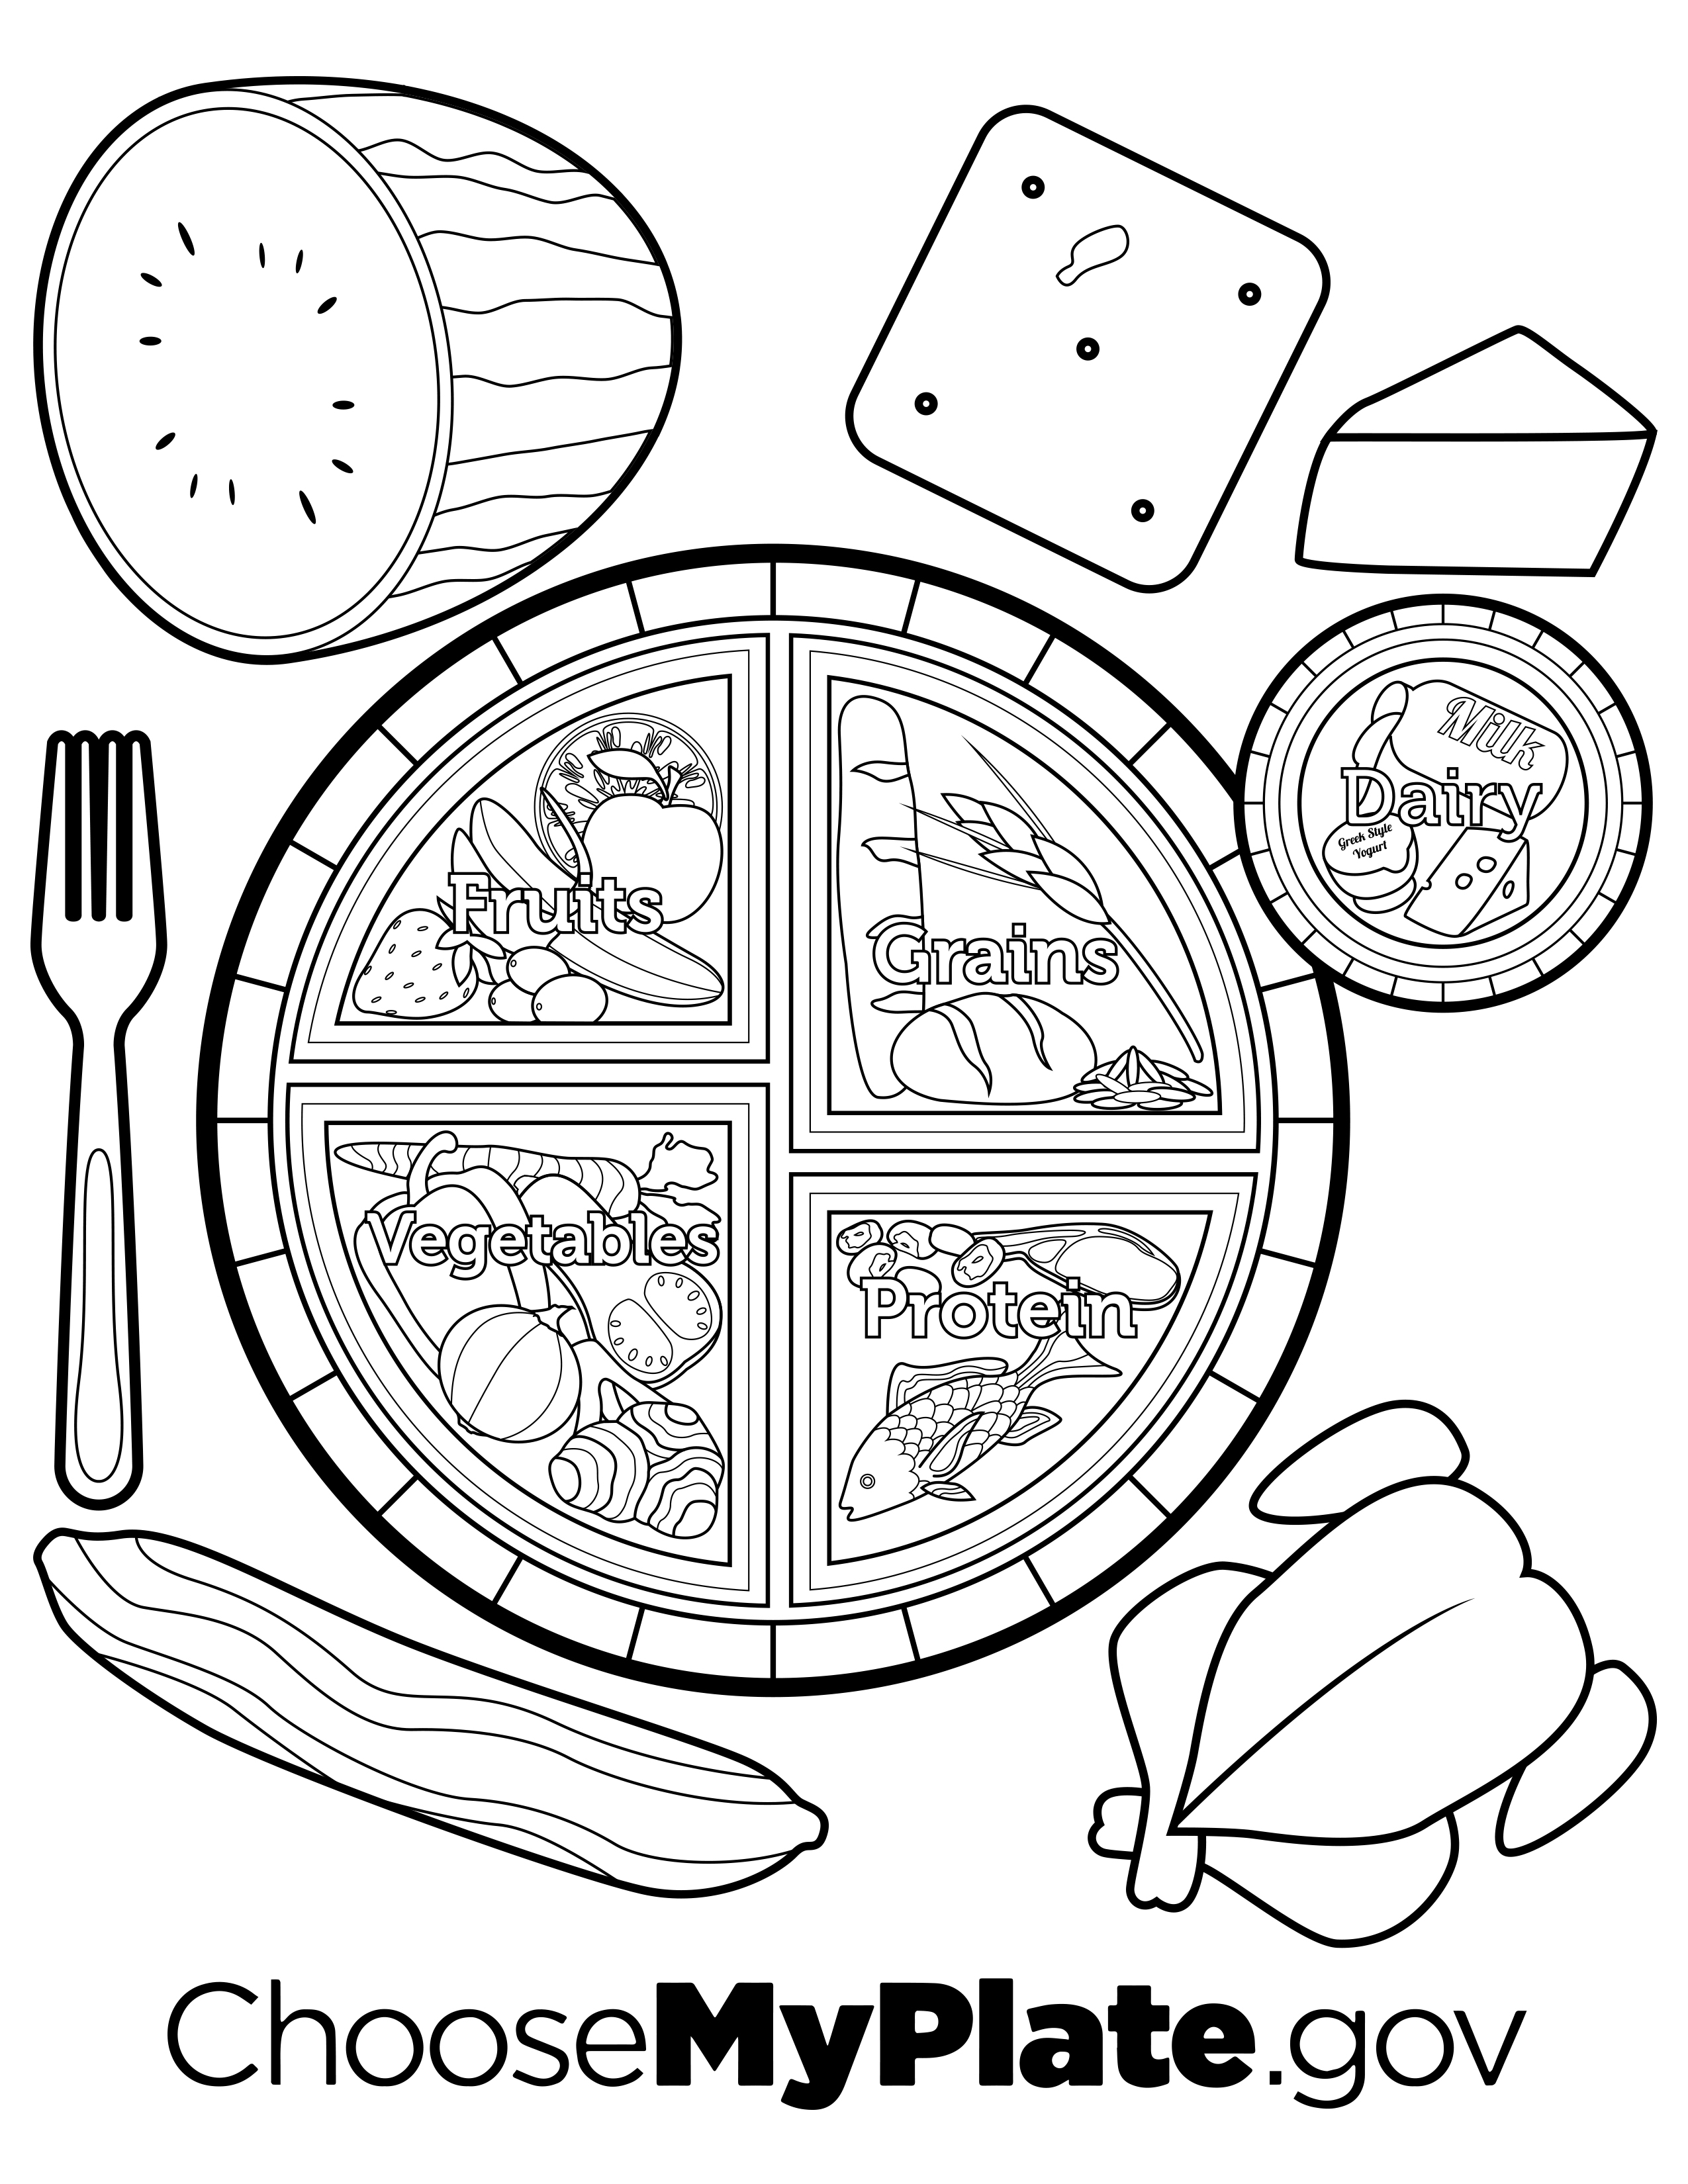 MyPlate Coloring Page | nutritioneducationstore.com